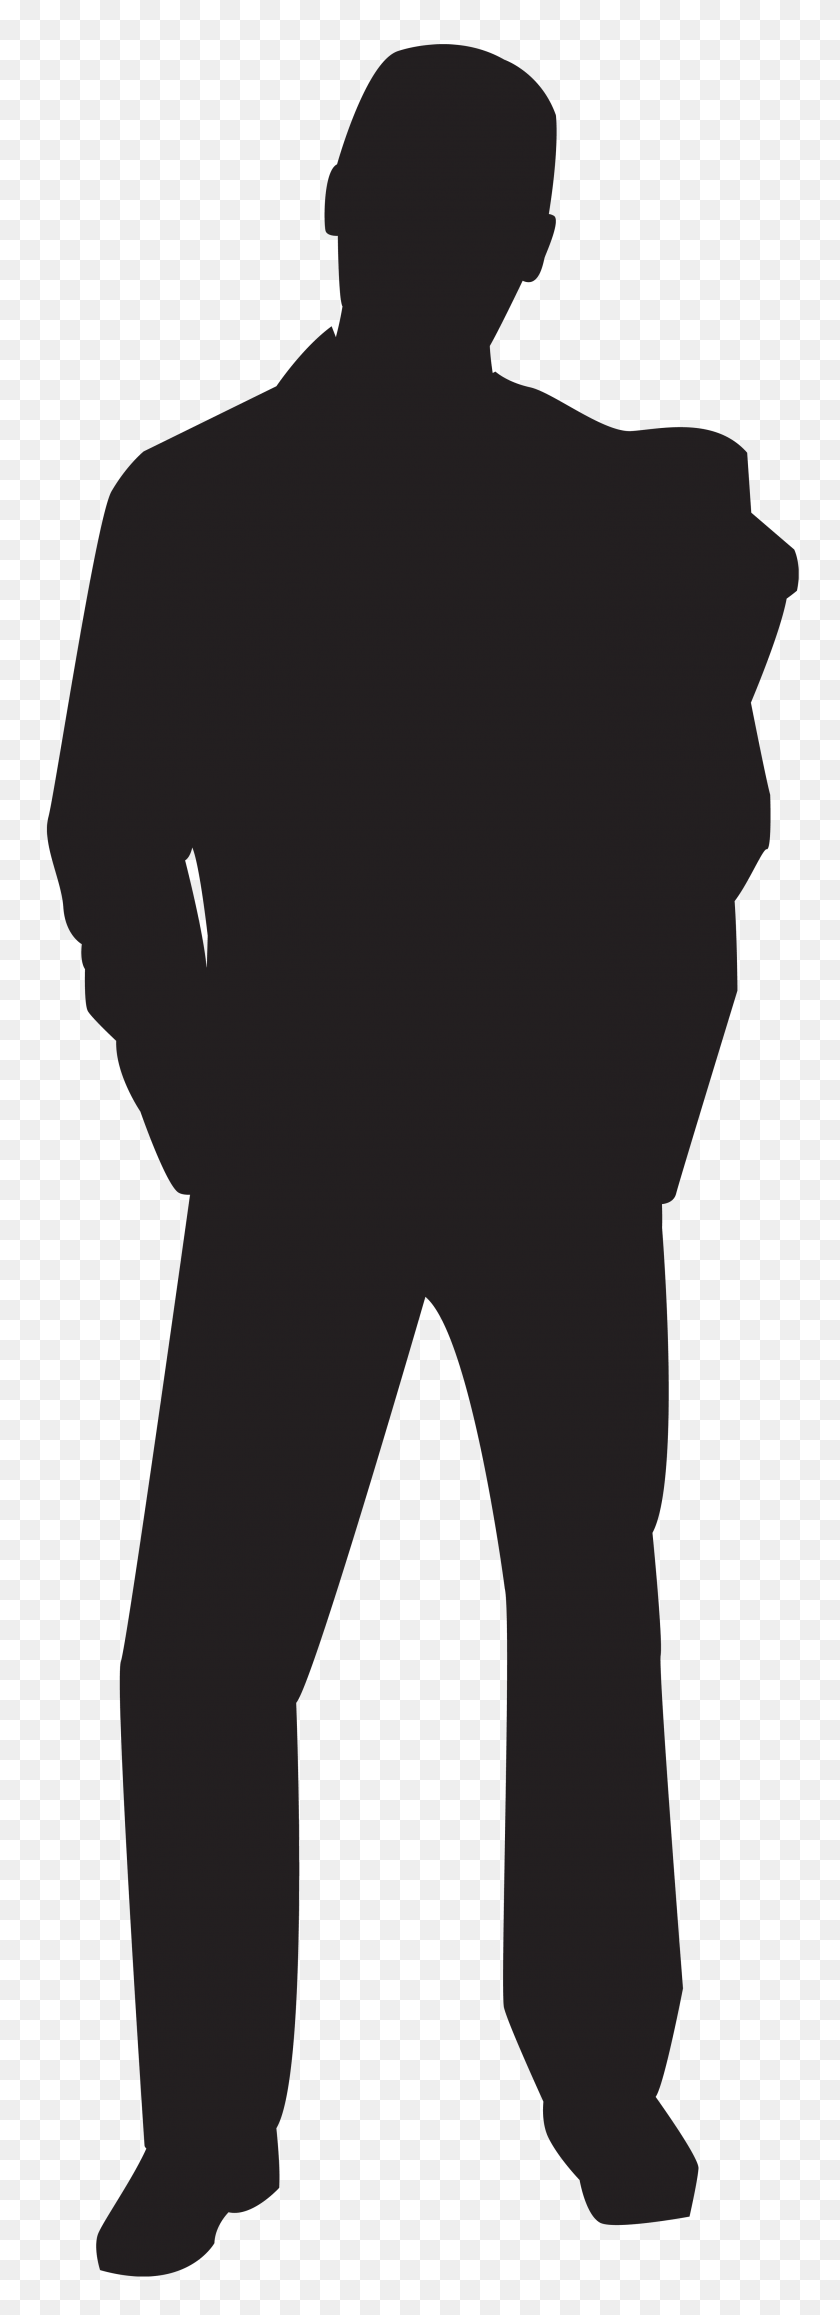 Silhouette Png Transparent Silhouette Images - Silhouette Man PNG ...